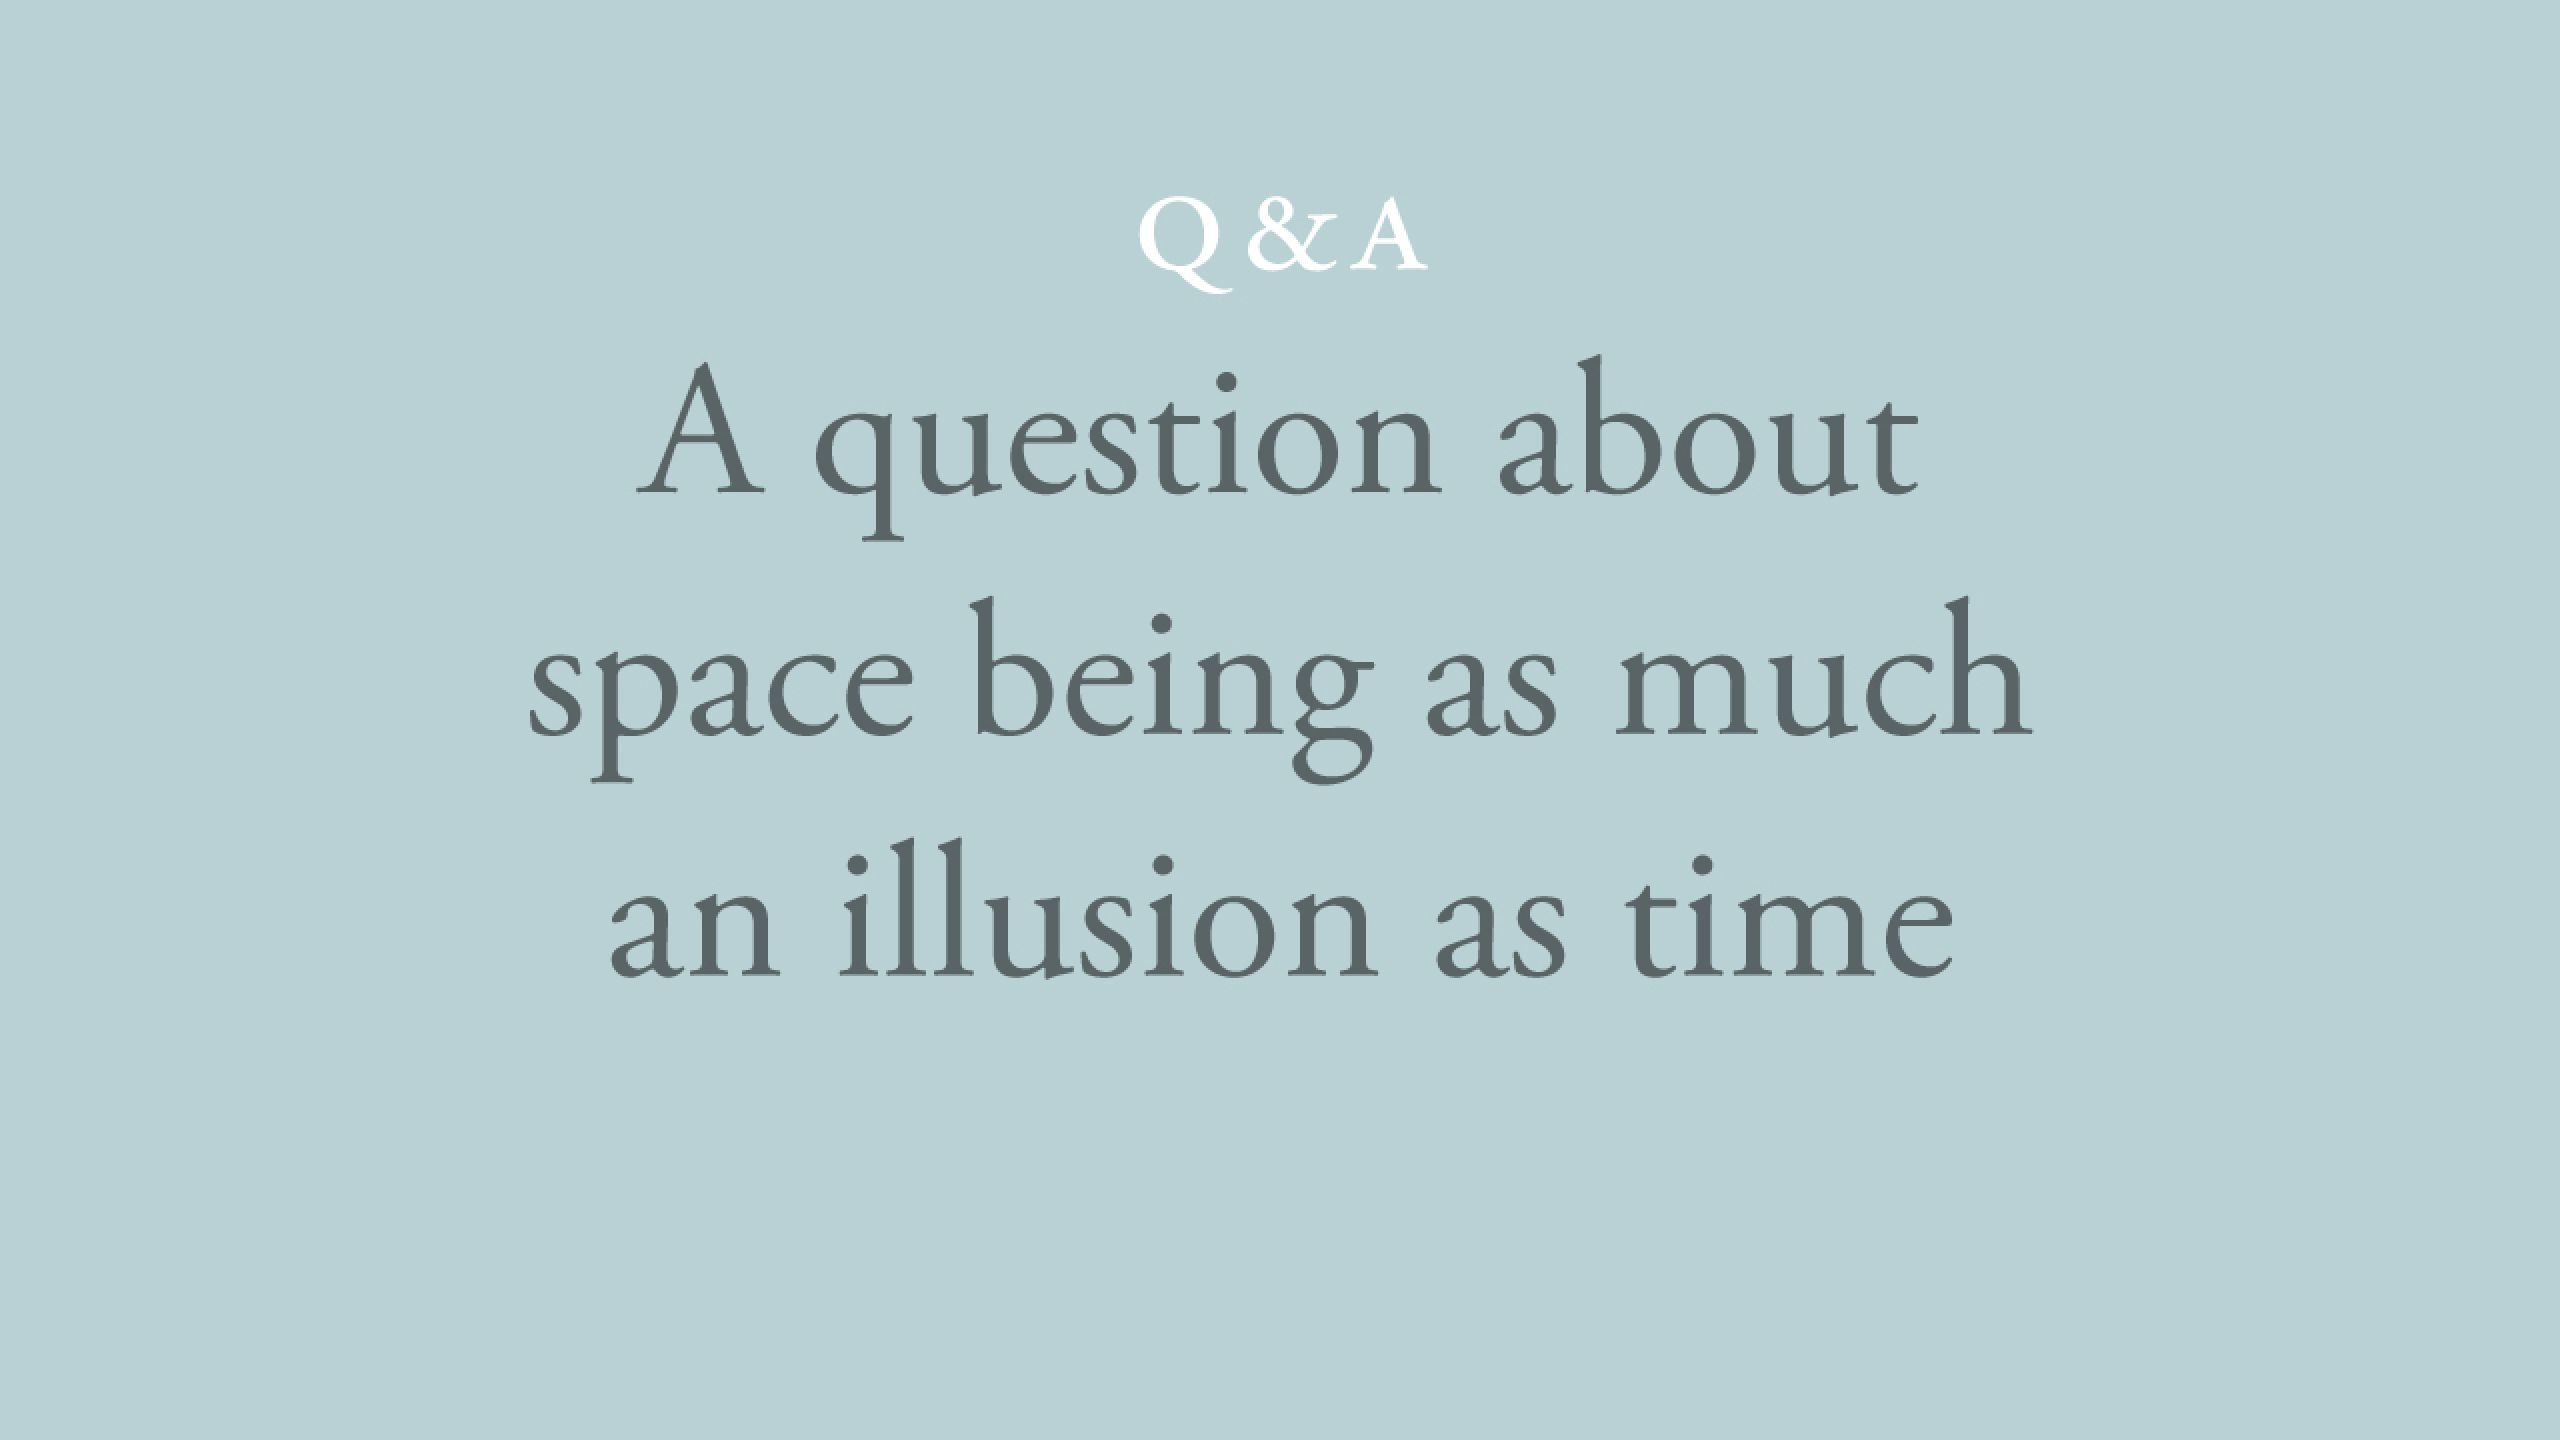 Is space just as much an illusion as time?